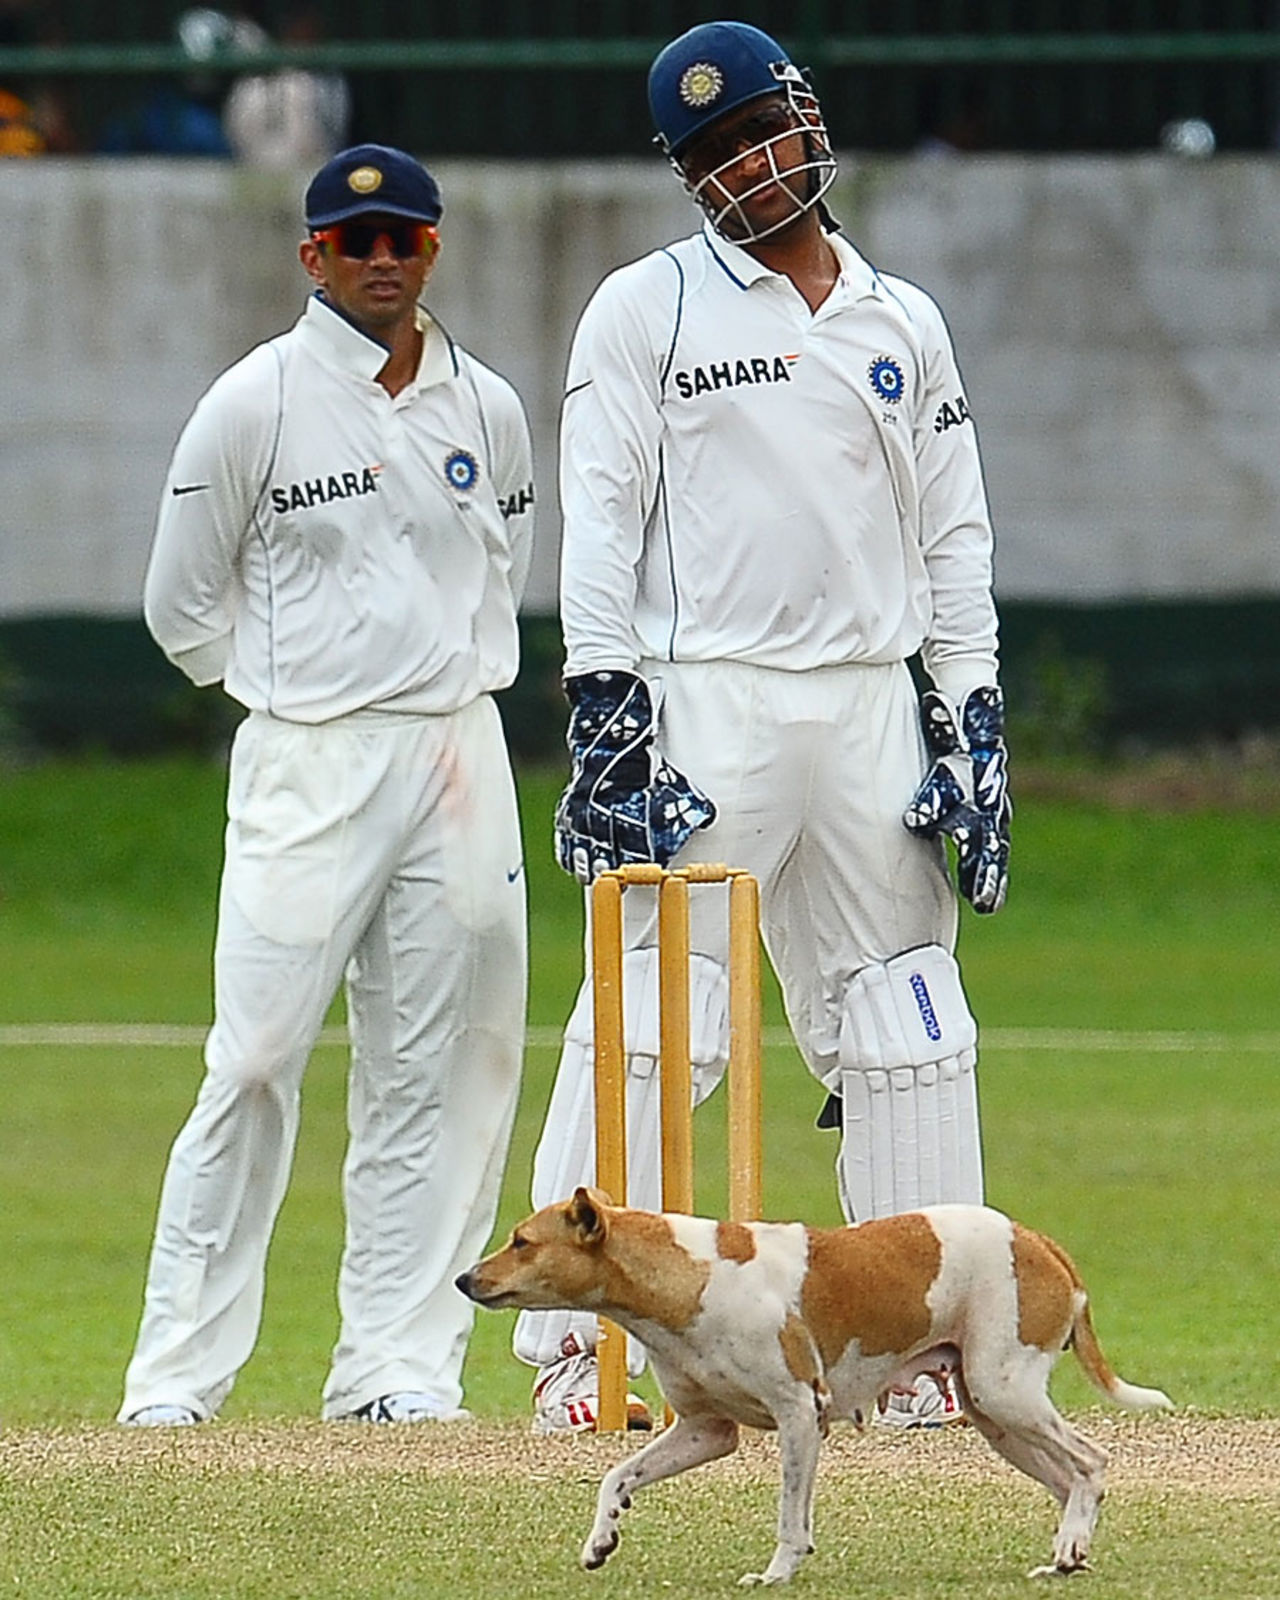 A dog interrupts play as Rahul Dravid and MS Dhoni look on, Sri Lanka Board President's XI v Indians, 3rd day, Colombo, July 15, 2010 